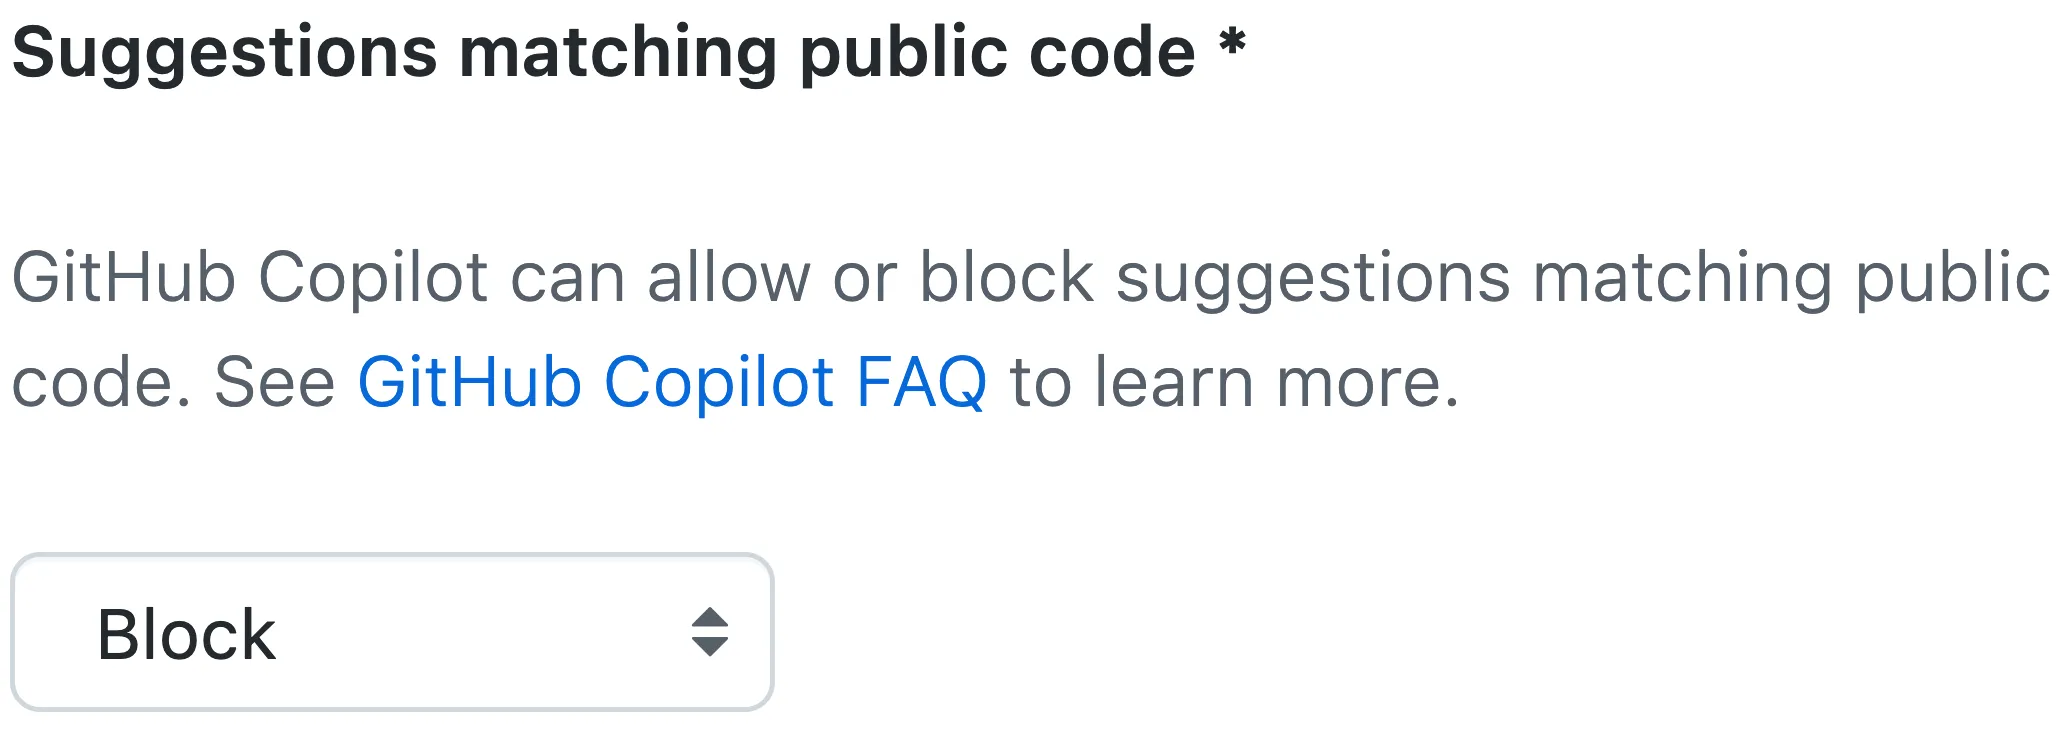 GitHub Copilot options screen reads: Suggestions matching public code. GitHub Copilot can allow or block suggestions matching public code. See GitHub Copilot FAQ to learn more.